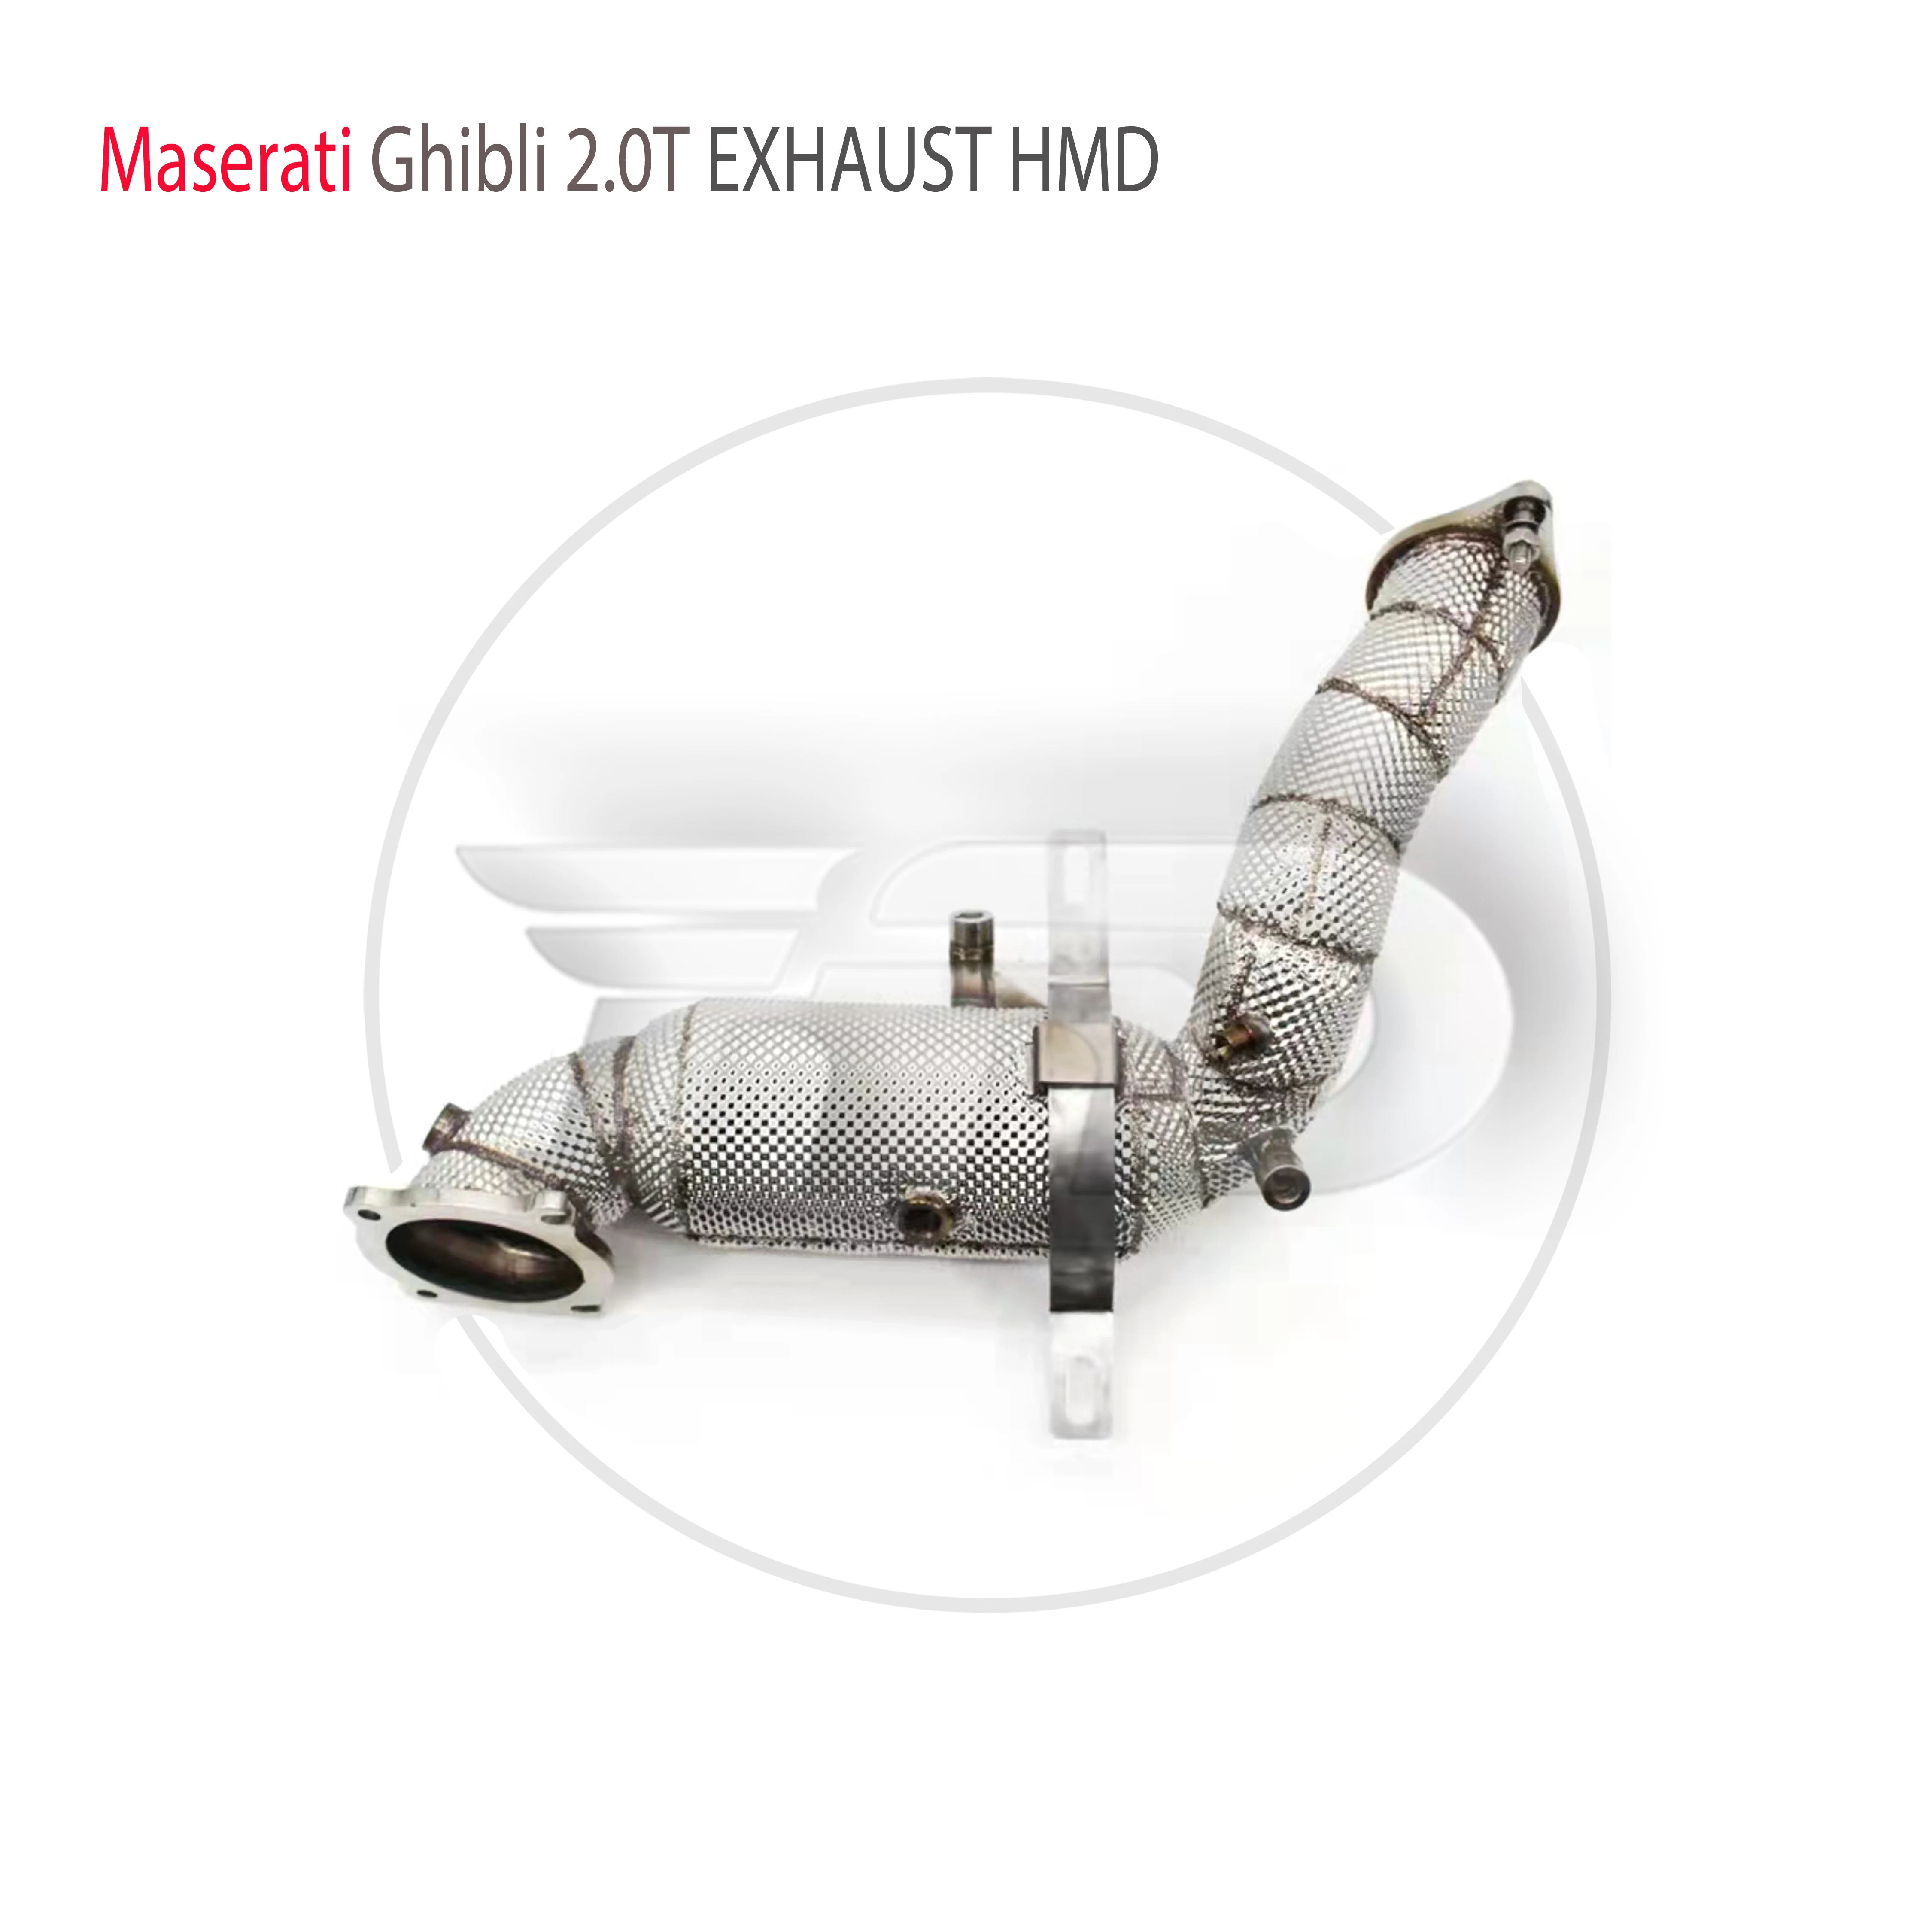 

HMD Stainless Steel Exhaust System High Flow Performance Downpipe for Maserati Ghibli 2.0T Car Accessories With Catalyst